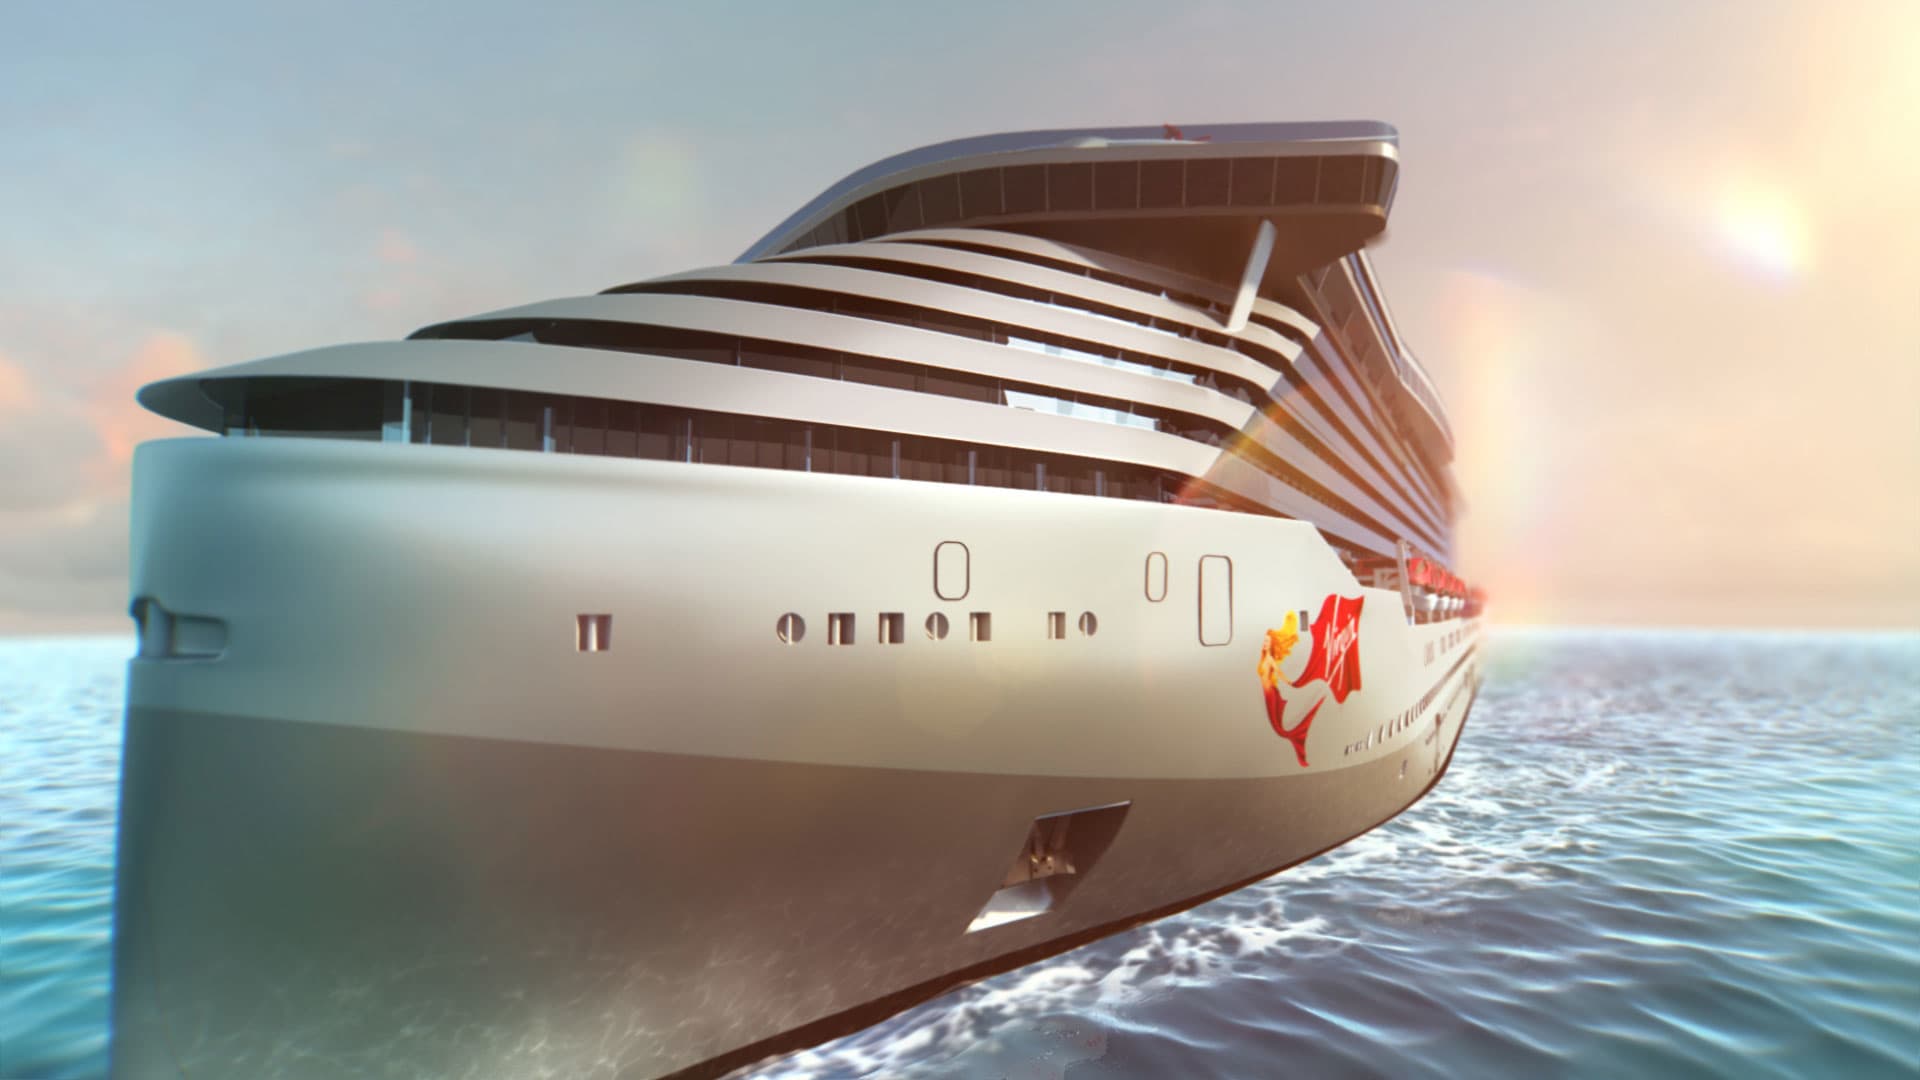 Richard Branson looks to disrupt cruise industry with Virgin Voyages